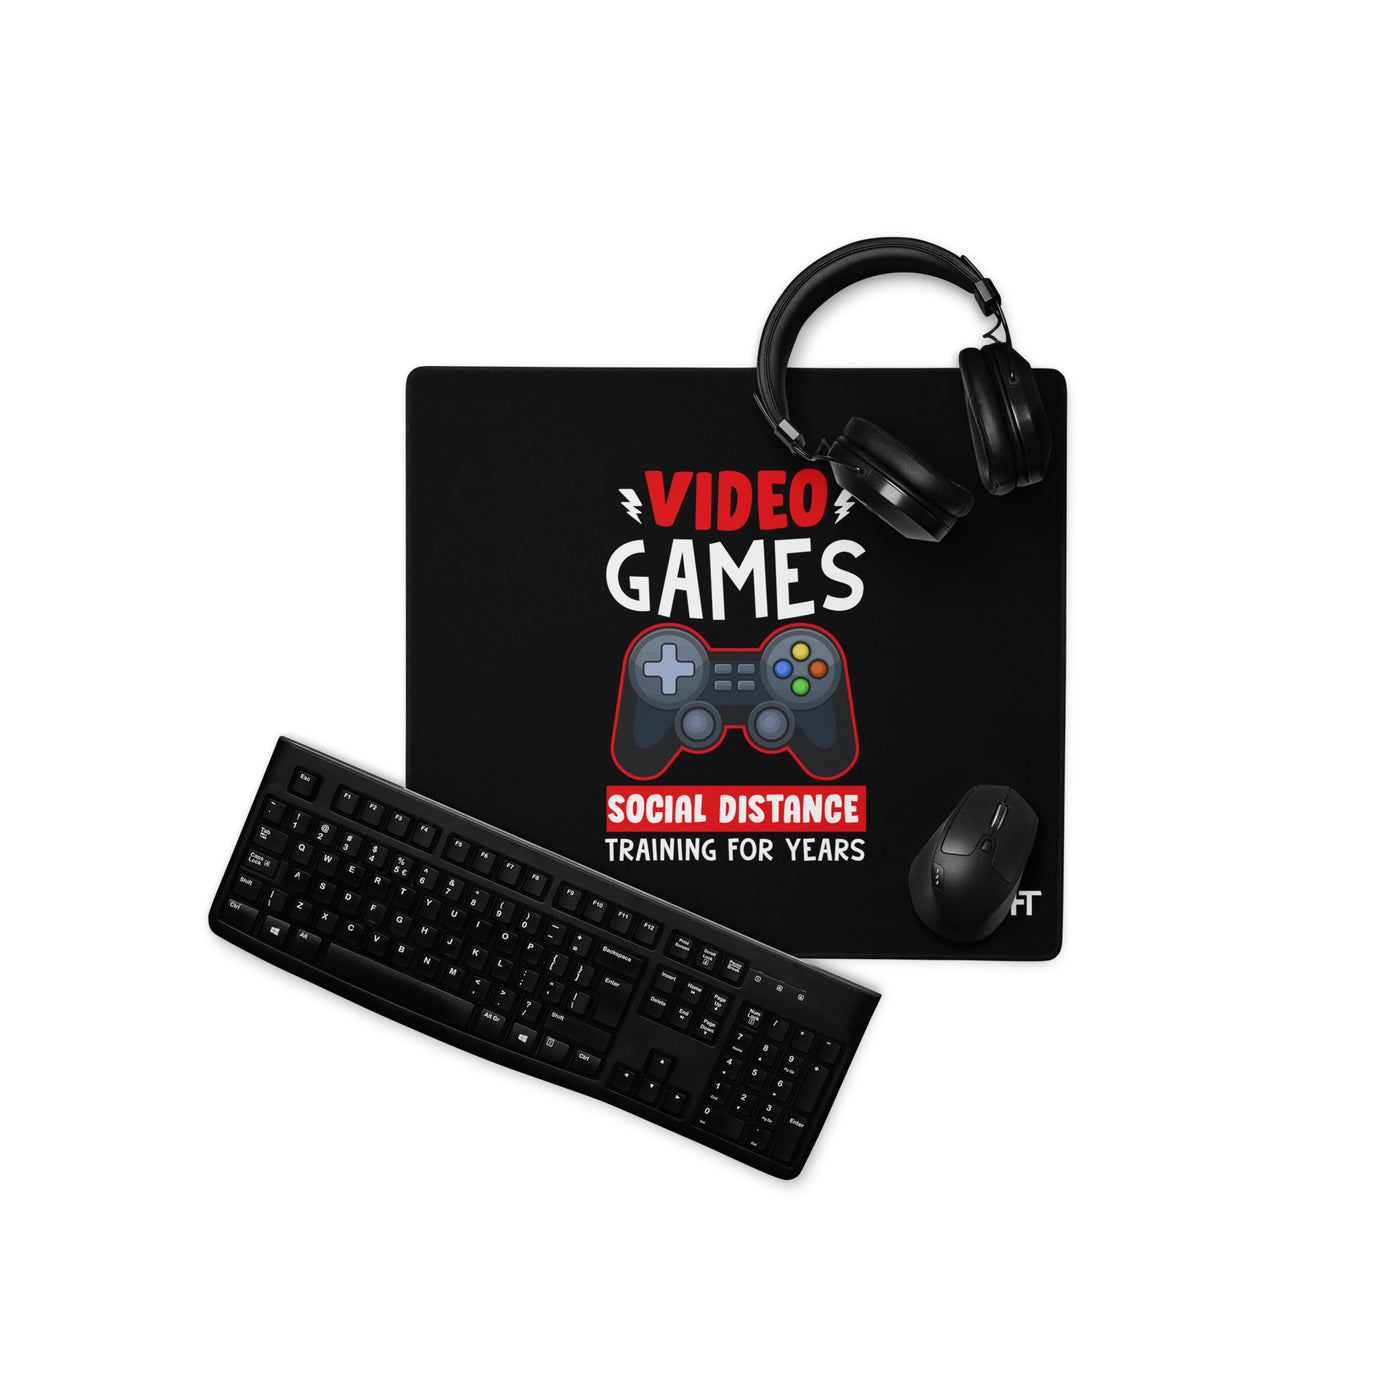 Video Games Social Distance Training for Years - Desk Mat